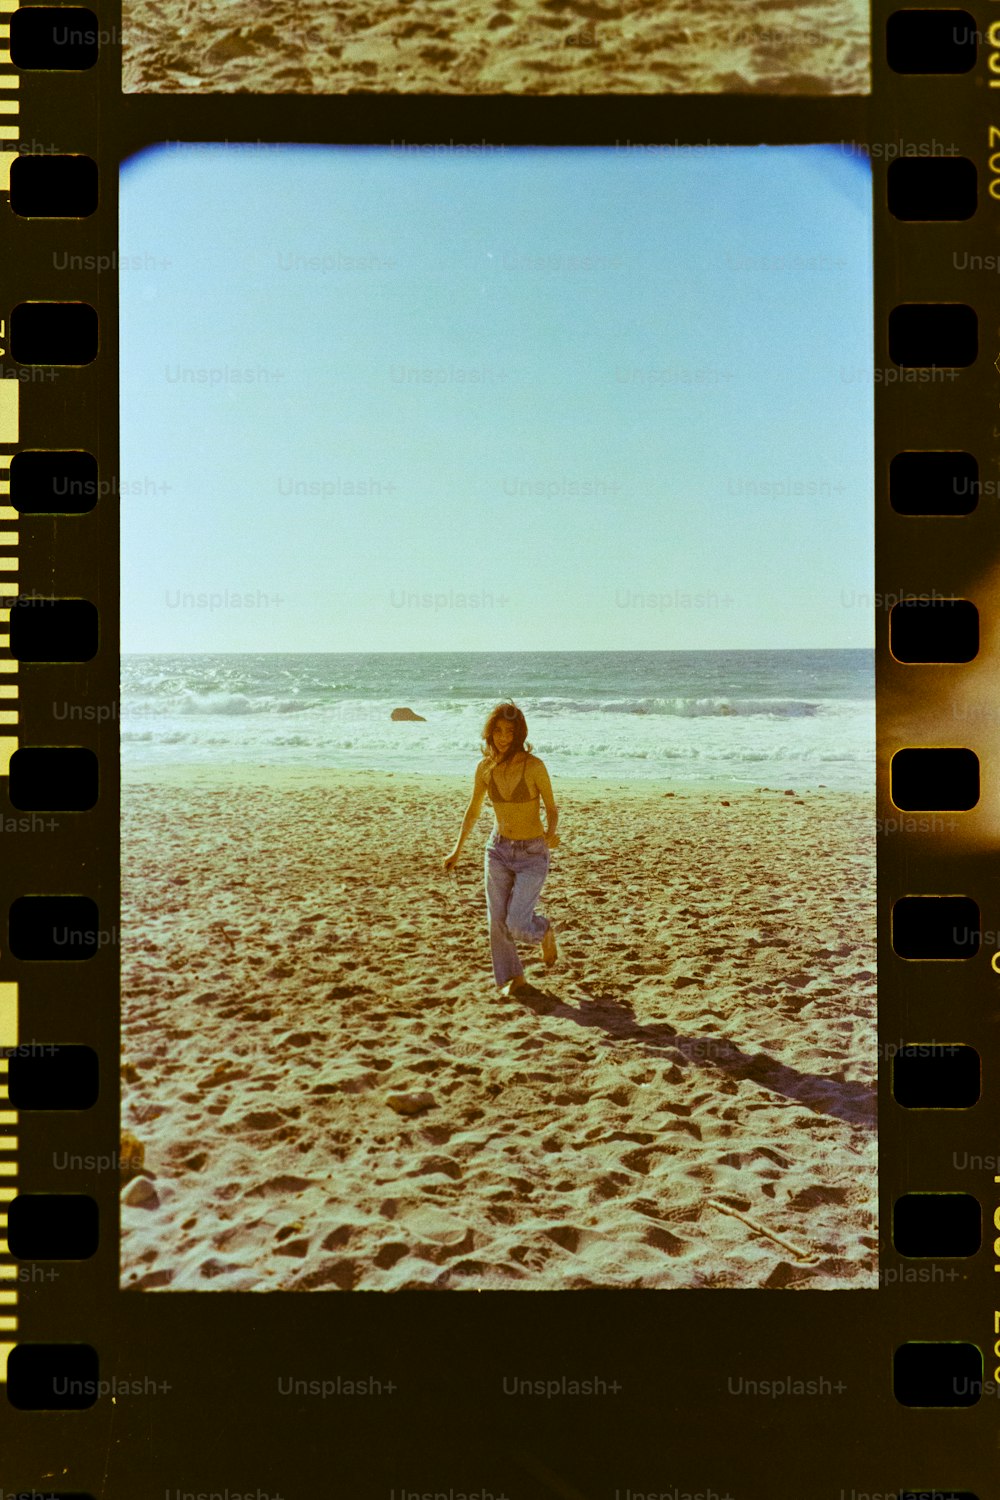 a polaroid picture of a woman walking on a beach